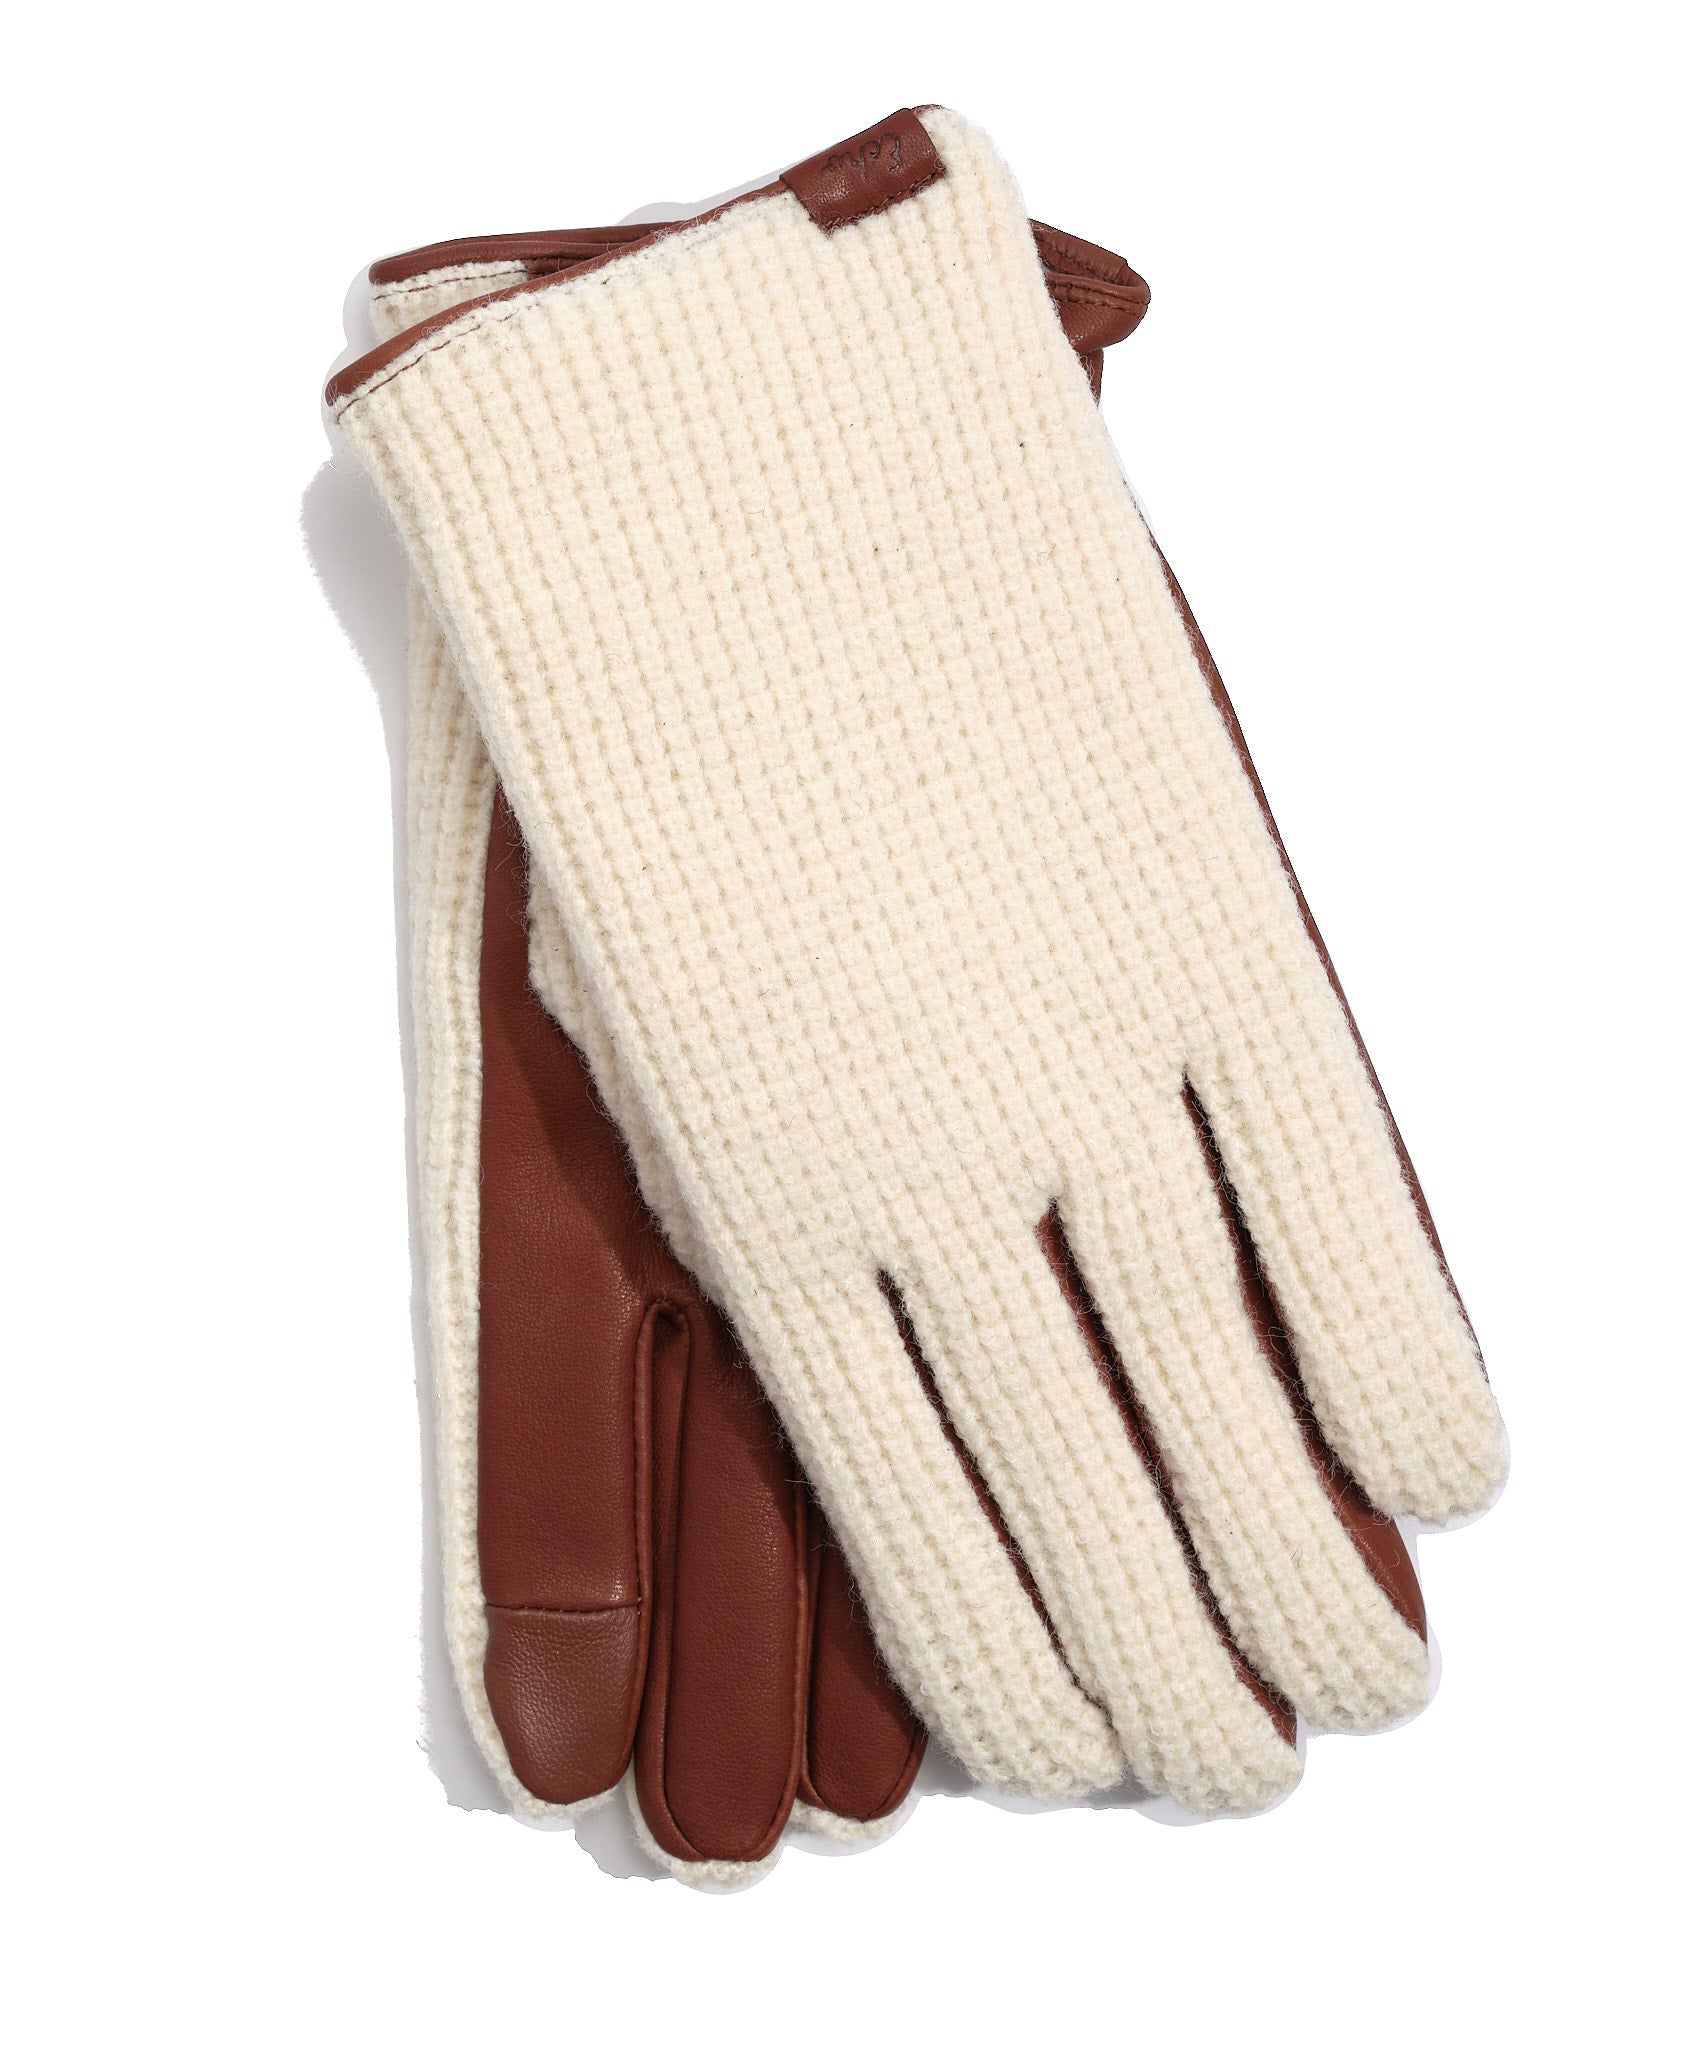 Waffle Stitch And Leather Glove in color Chestnut/Cream